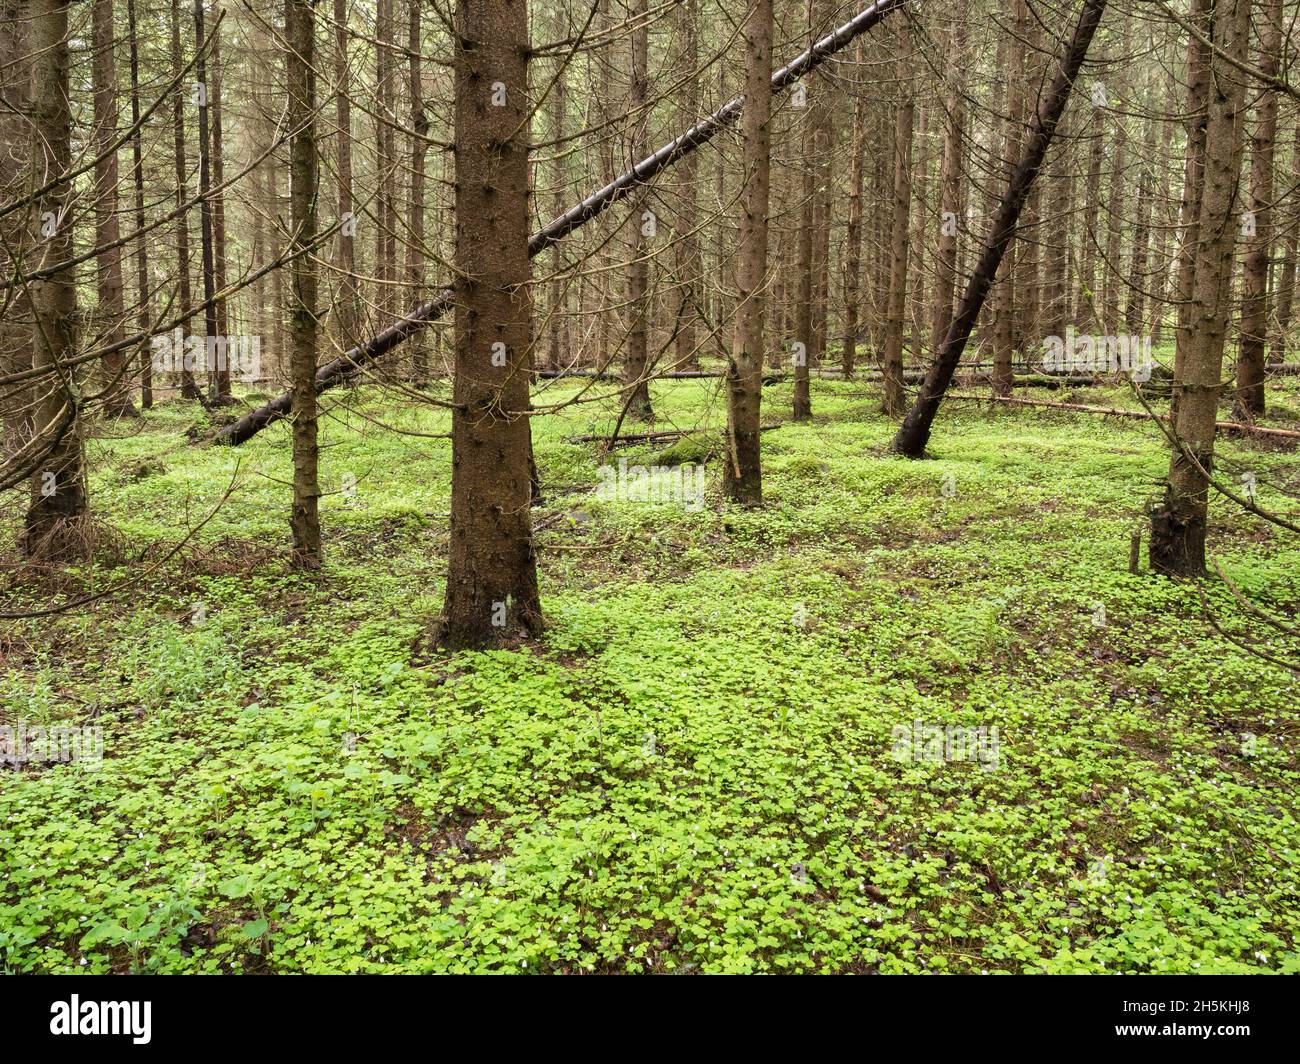 Herb-rich coniferous forest ground covered by wood sorrel Stock Photo